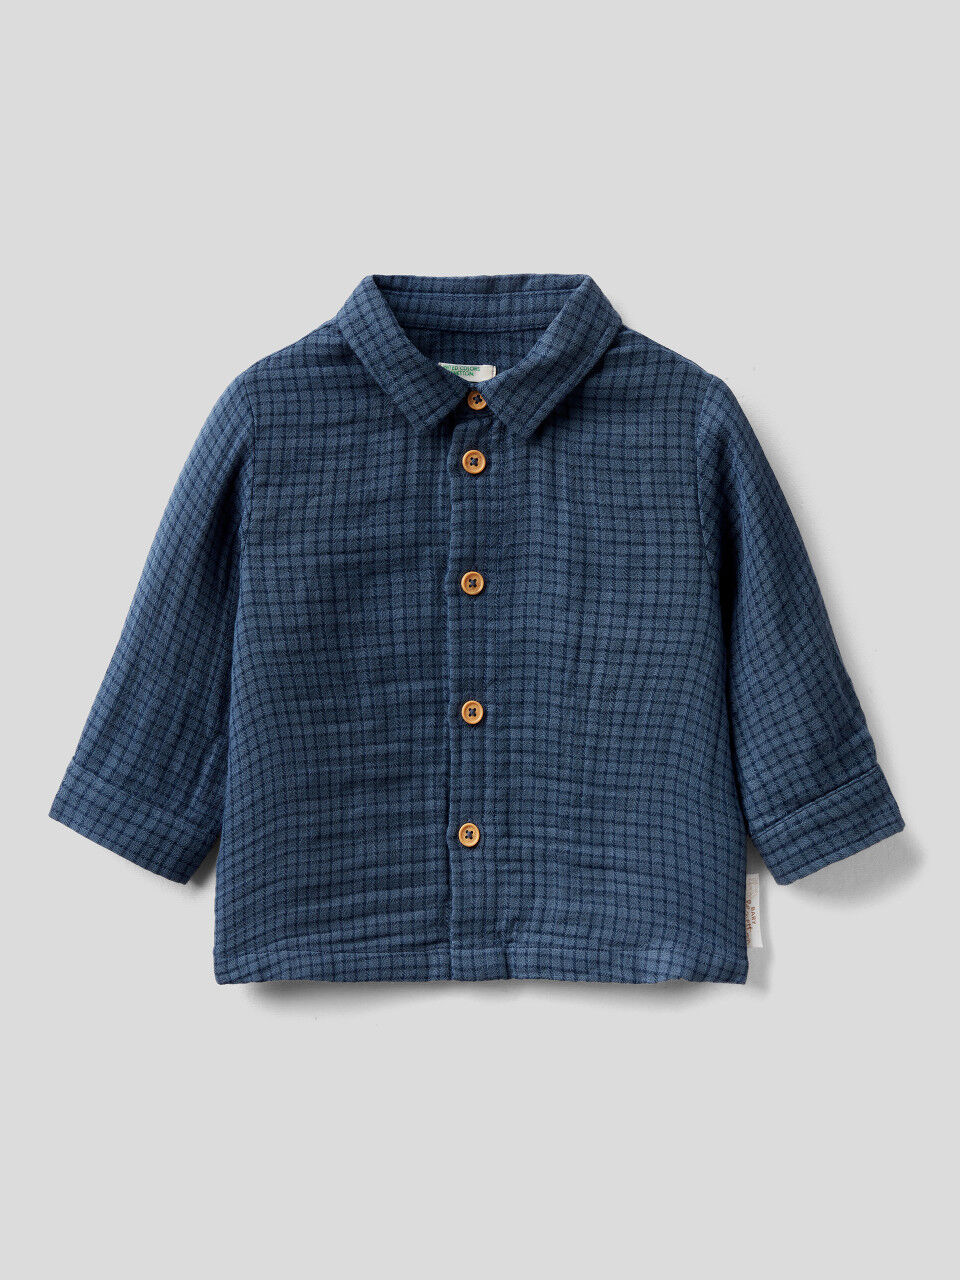 Check shirt in pure cotton